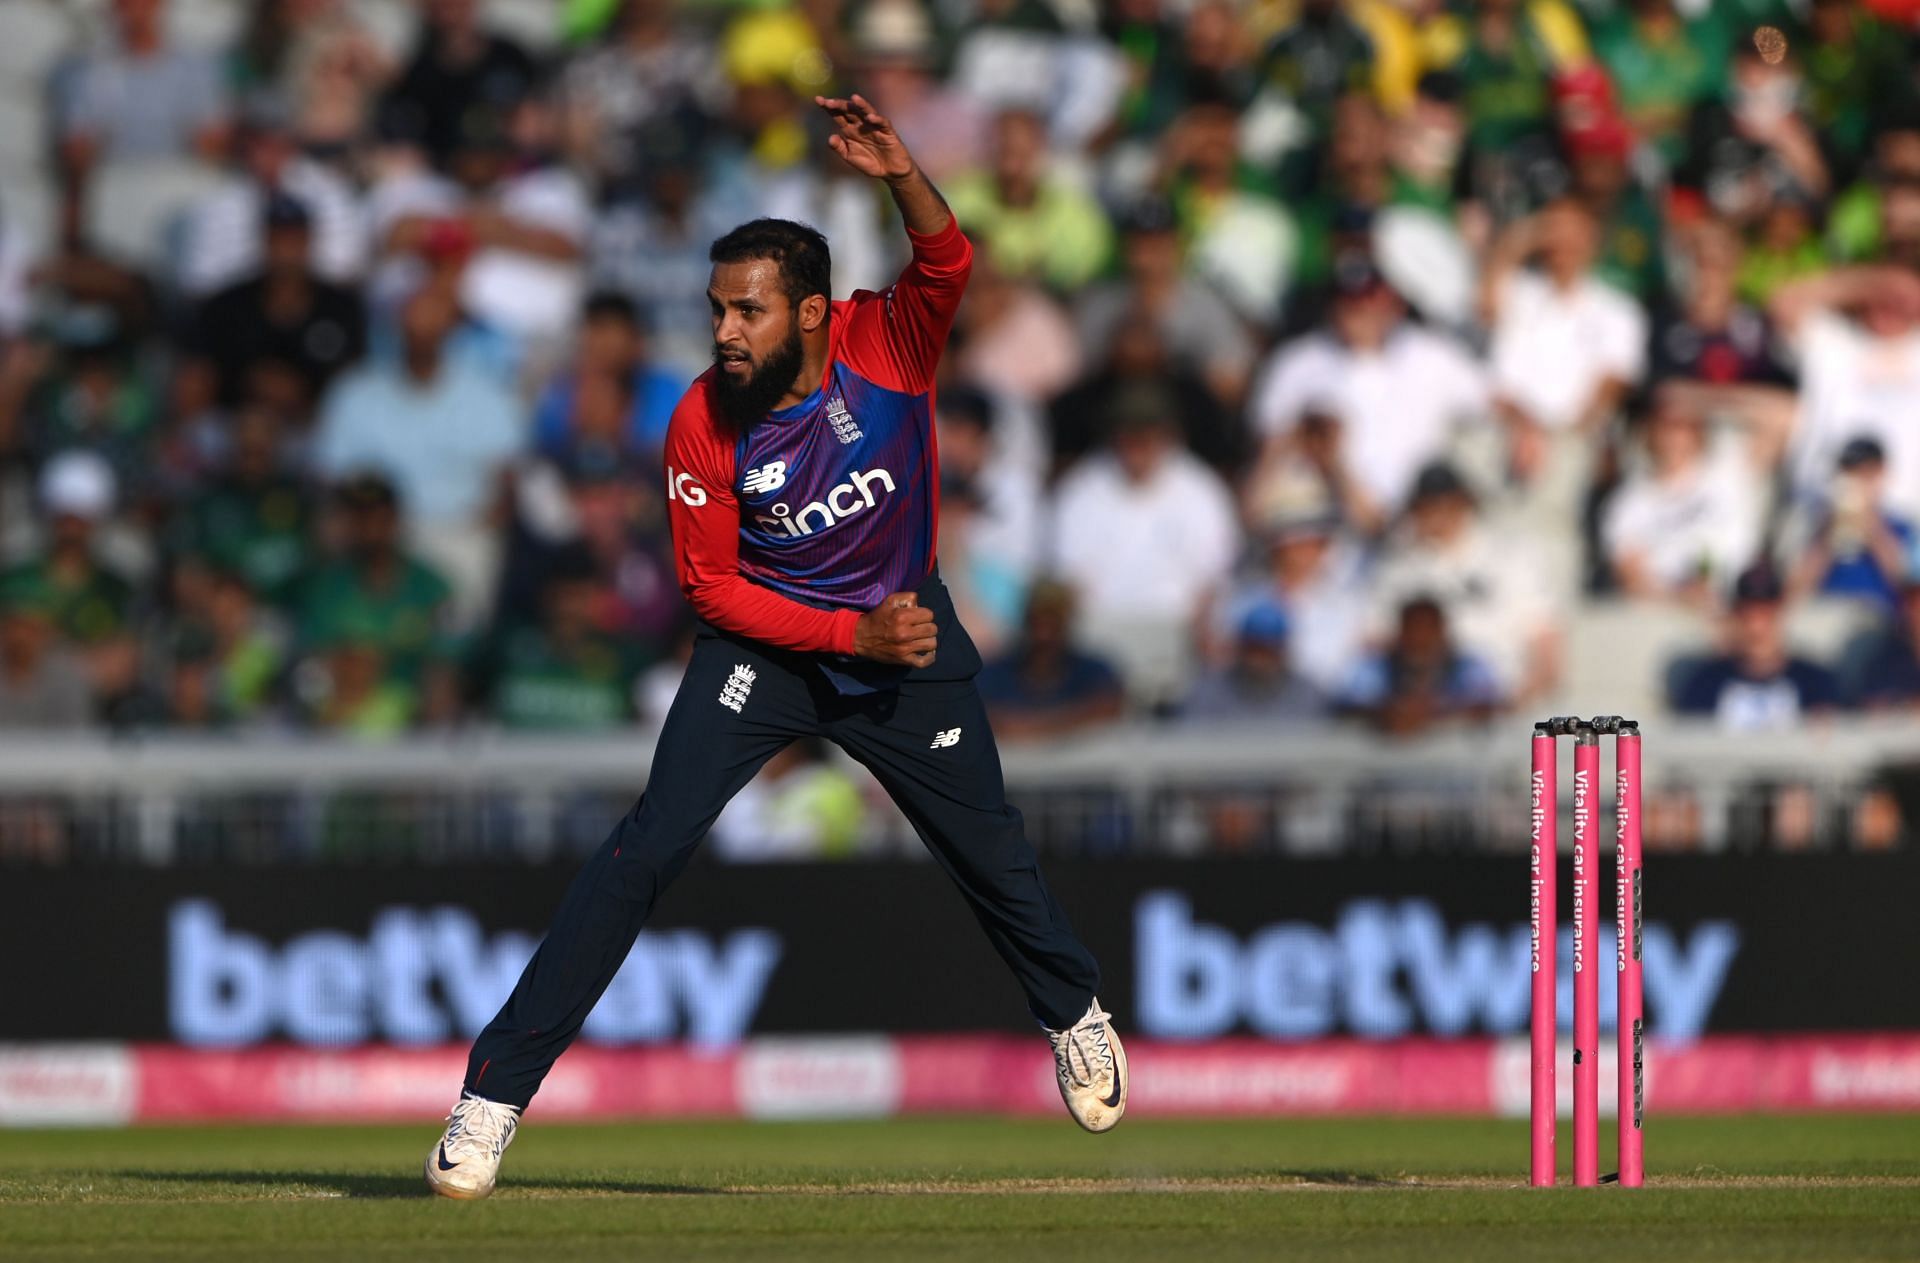 England vs West Indies, T20 World Cup 2021 Who will take the most wickets in todays match?